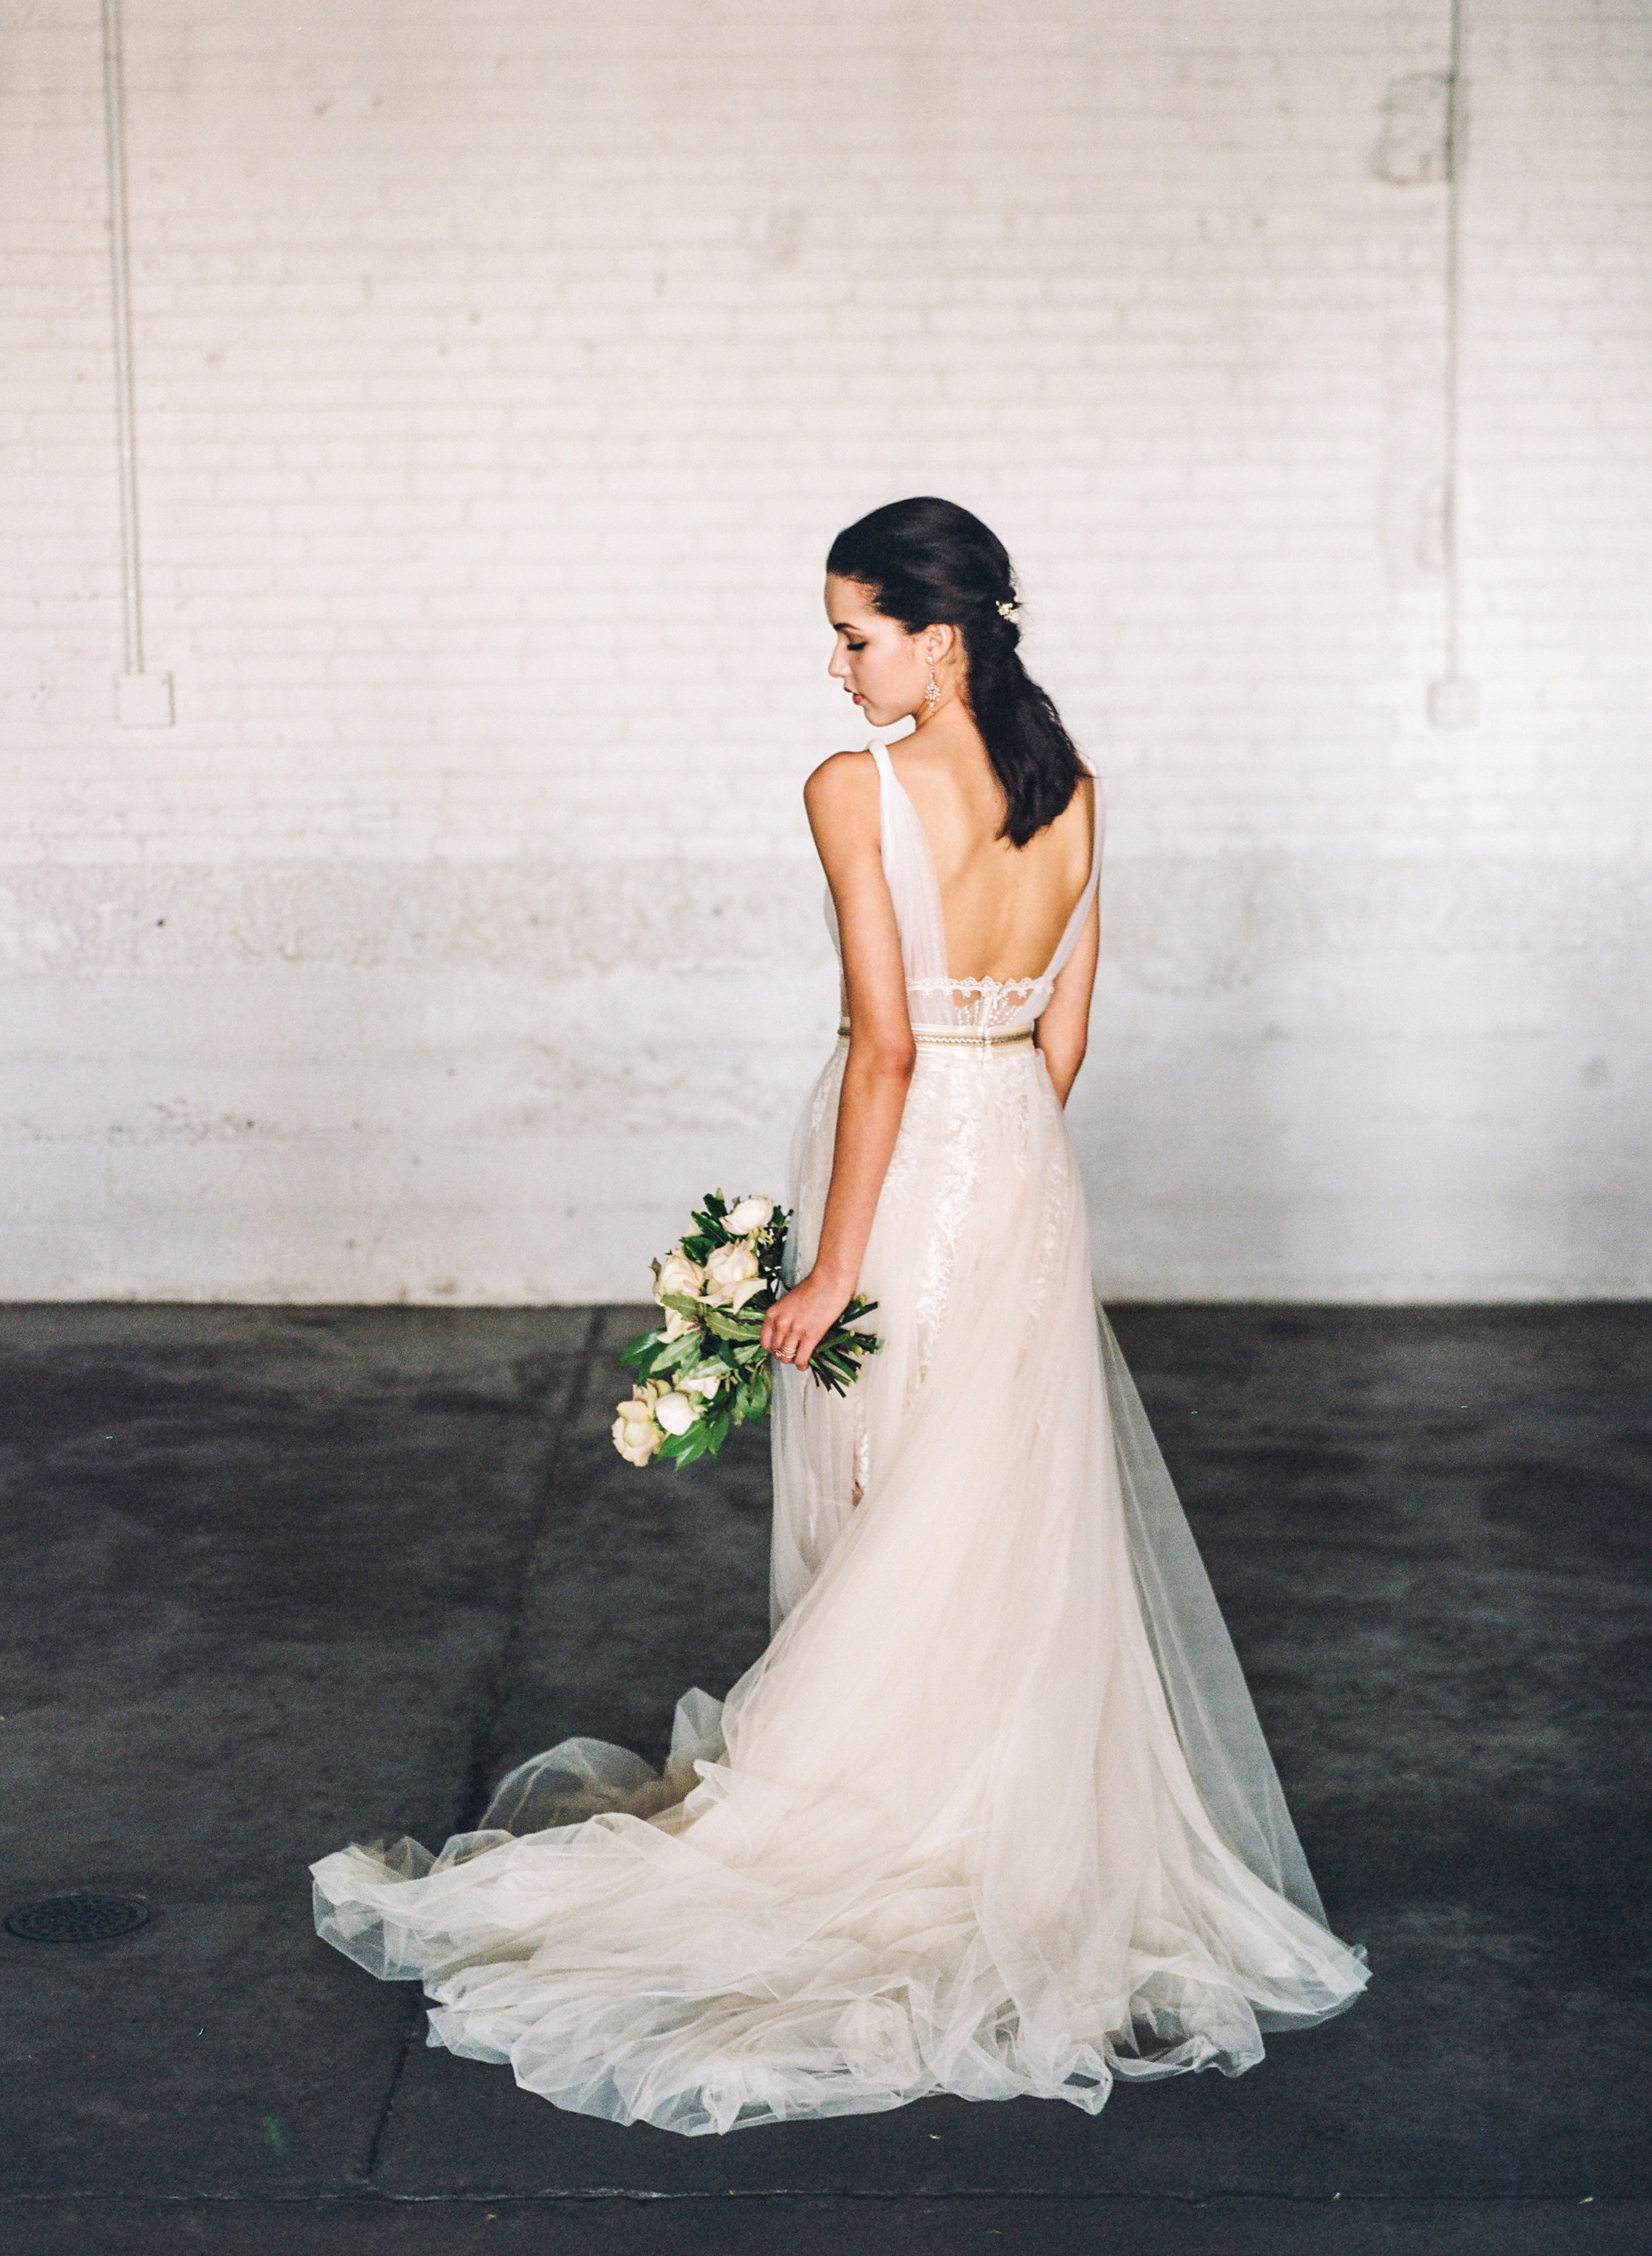  Galia Lahav "Flavia" gown from Little White Dress Bridal Shop | Connie Whitlock Photography | at Moss in Denver 